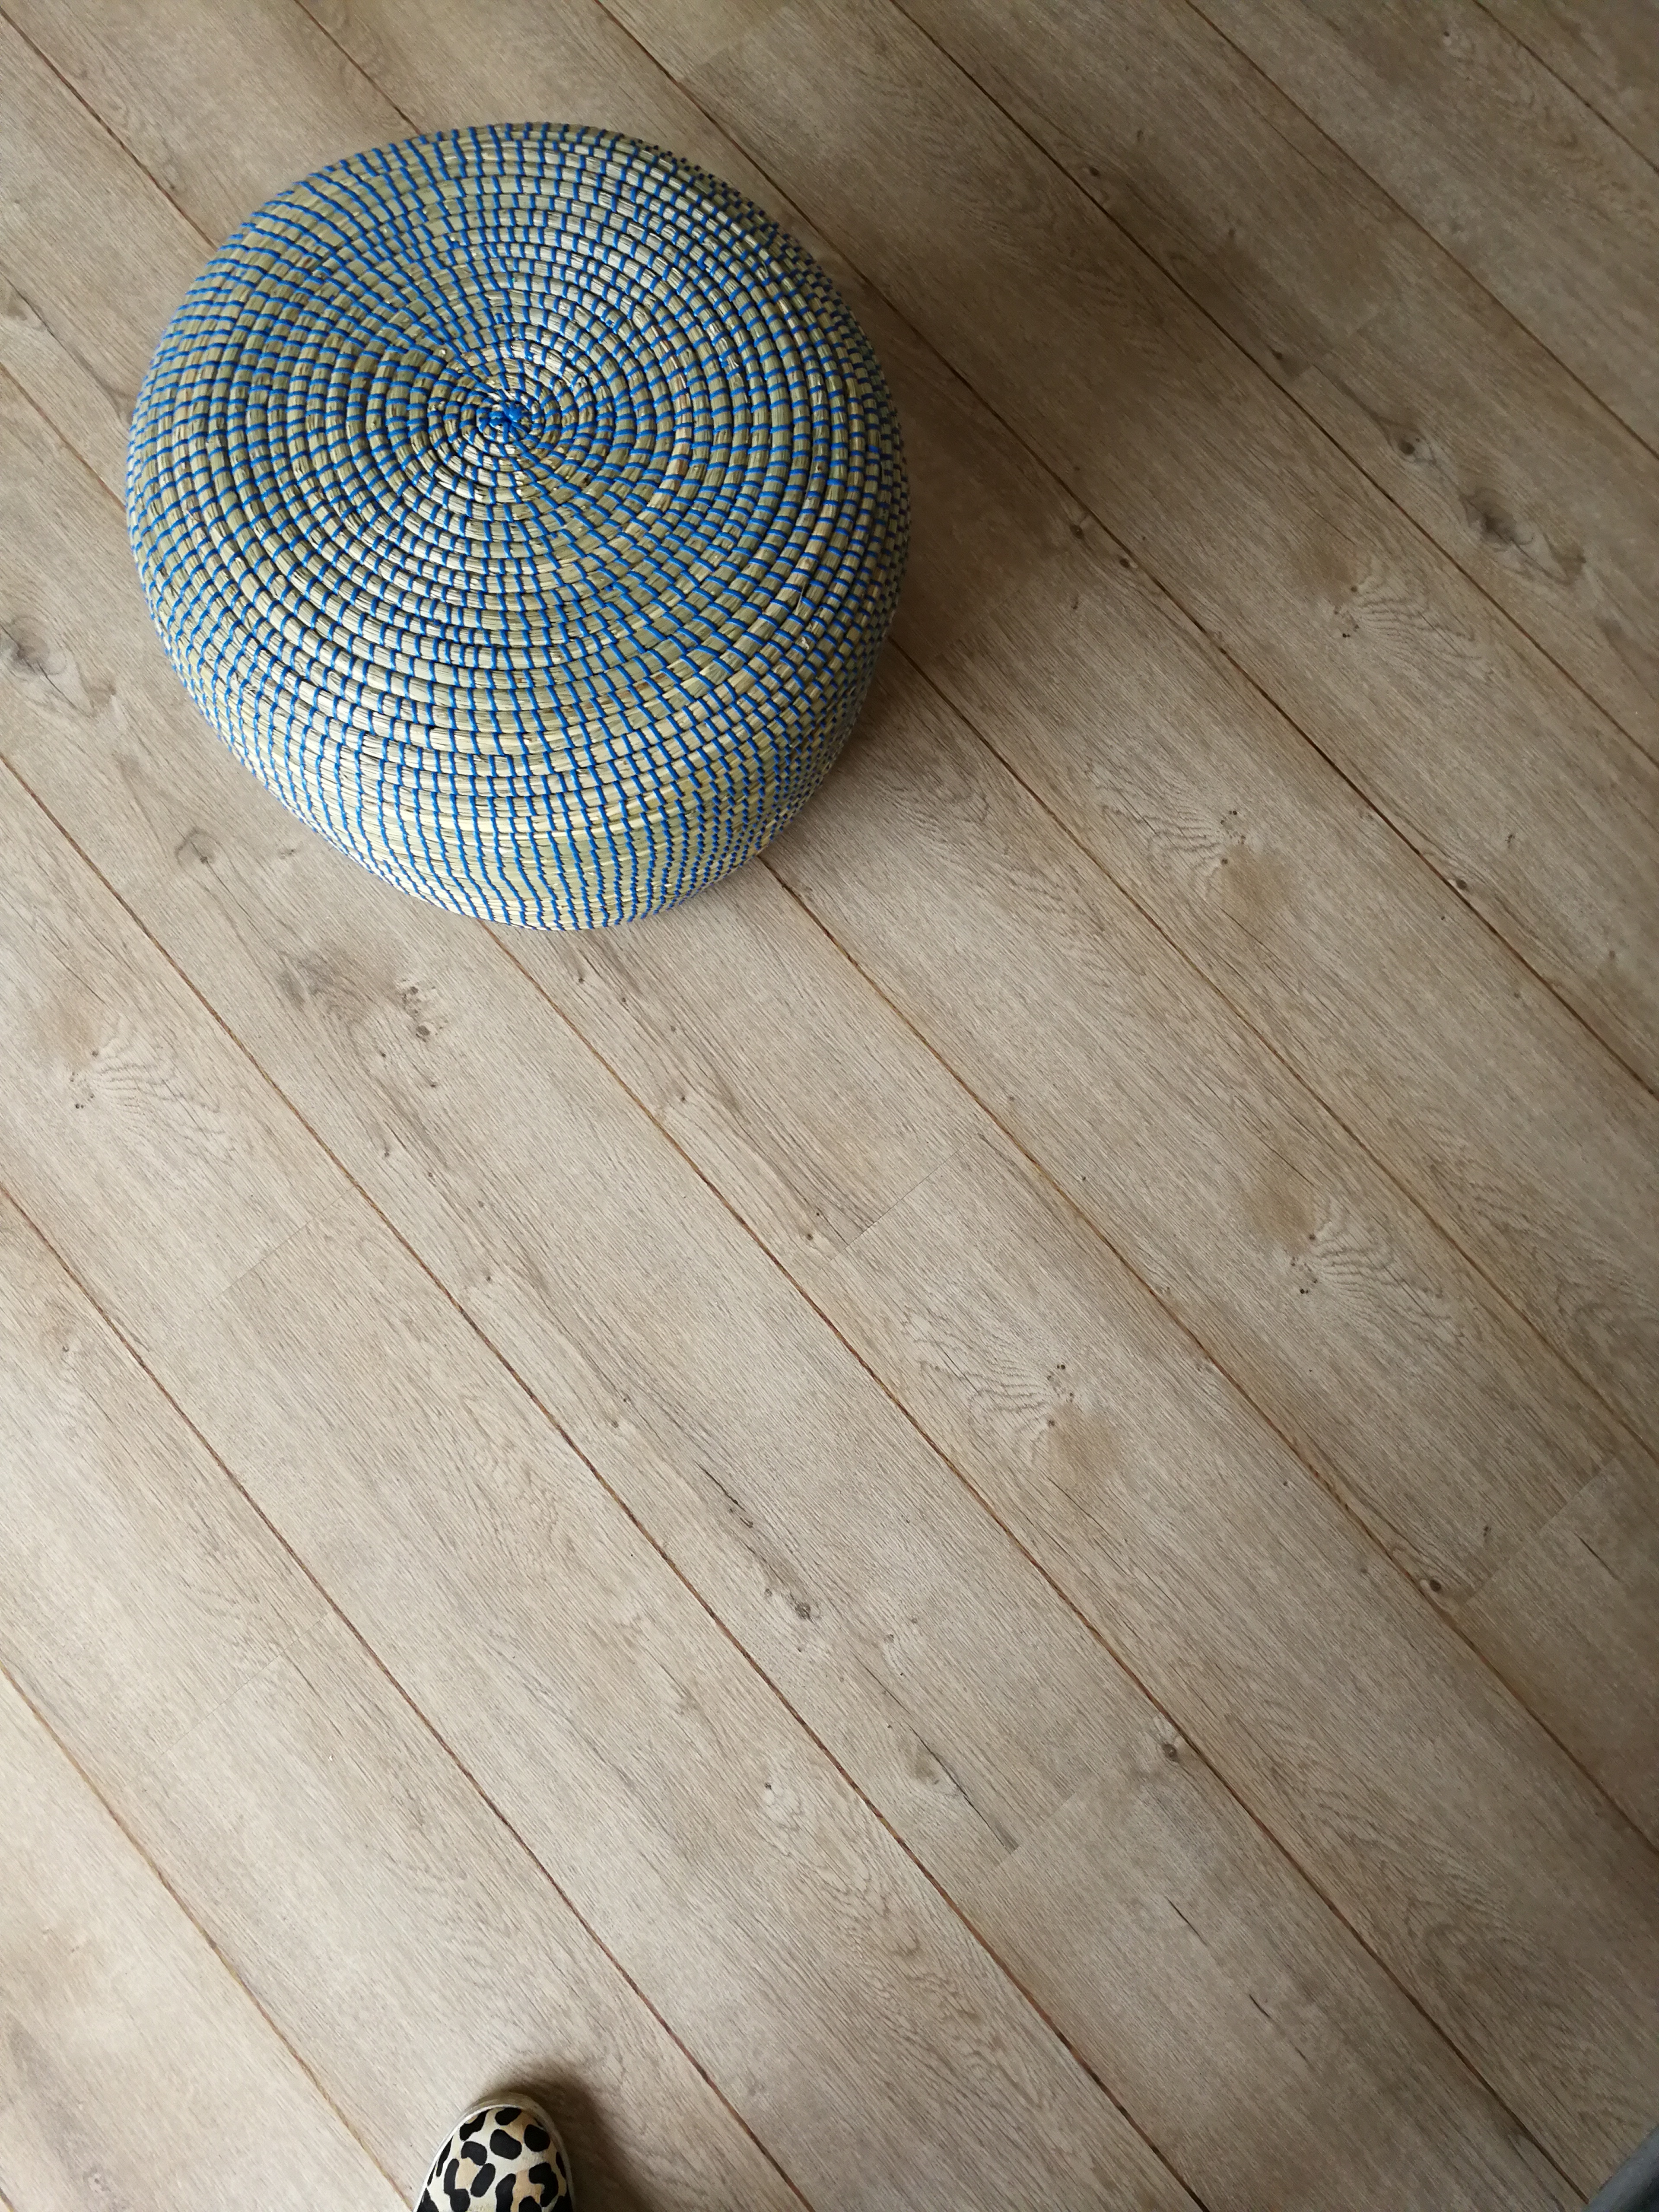 A photo of the finished flooring and the footstool/pouffe which had arrived.